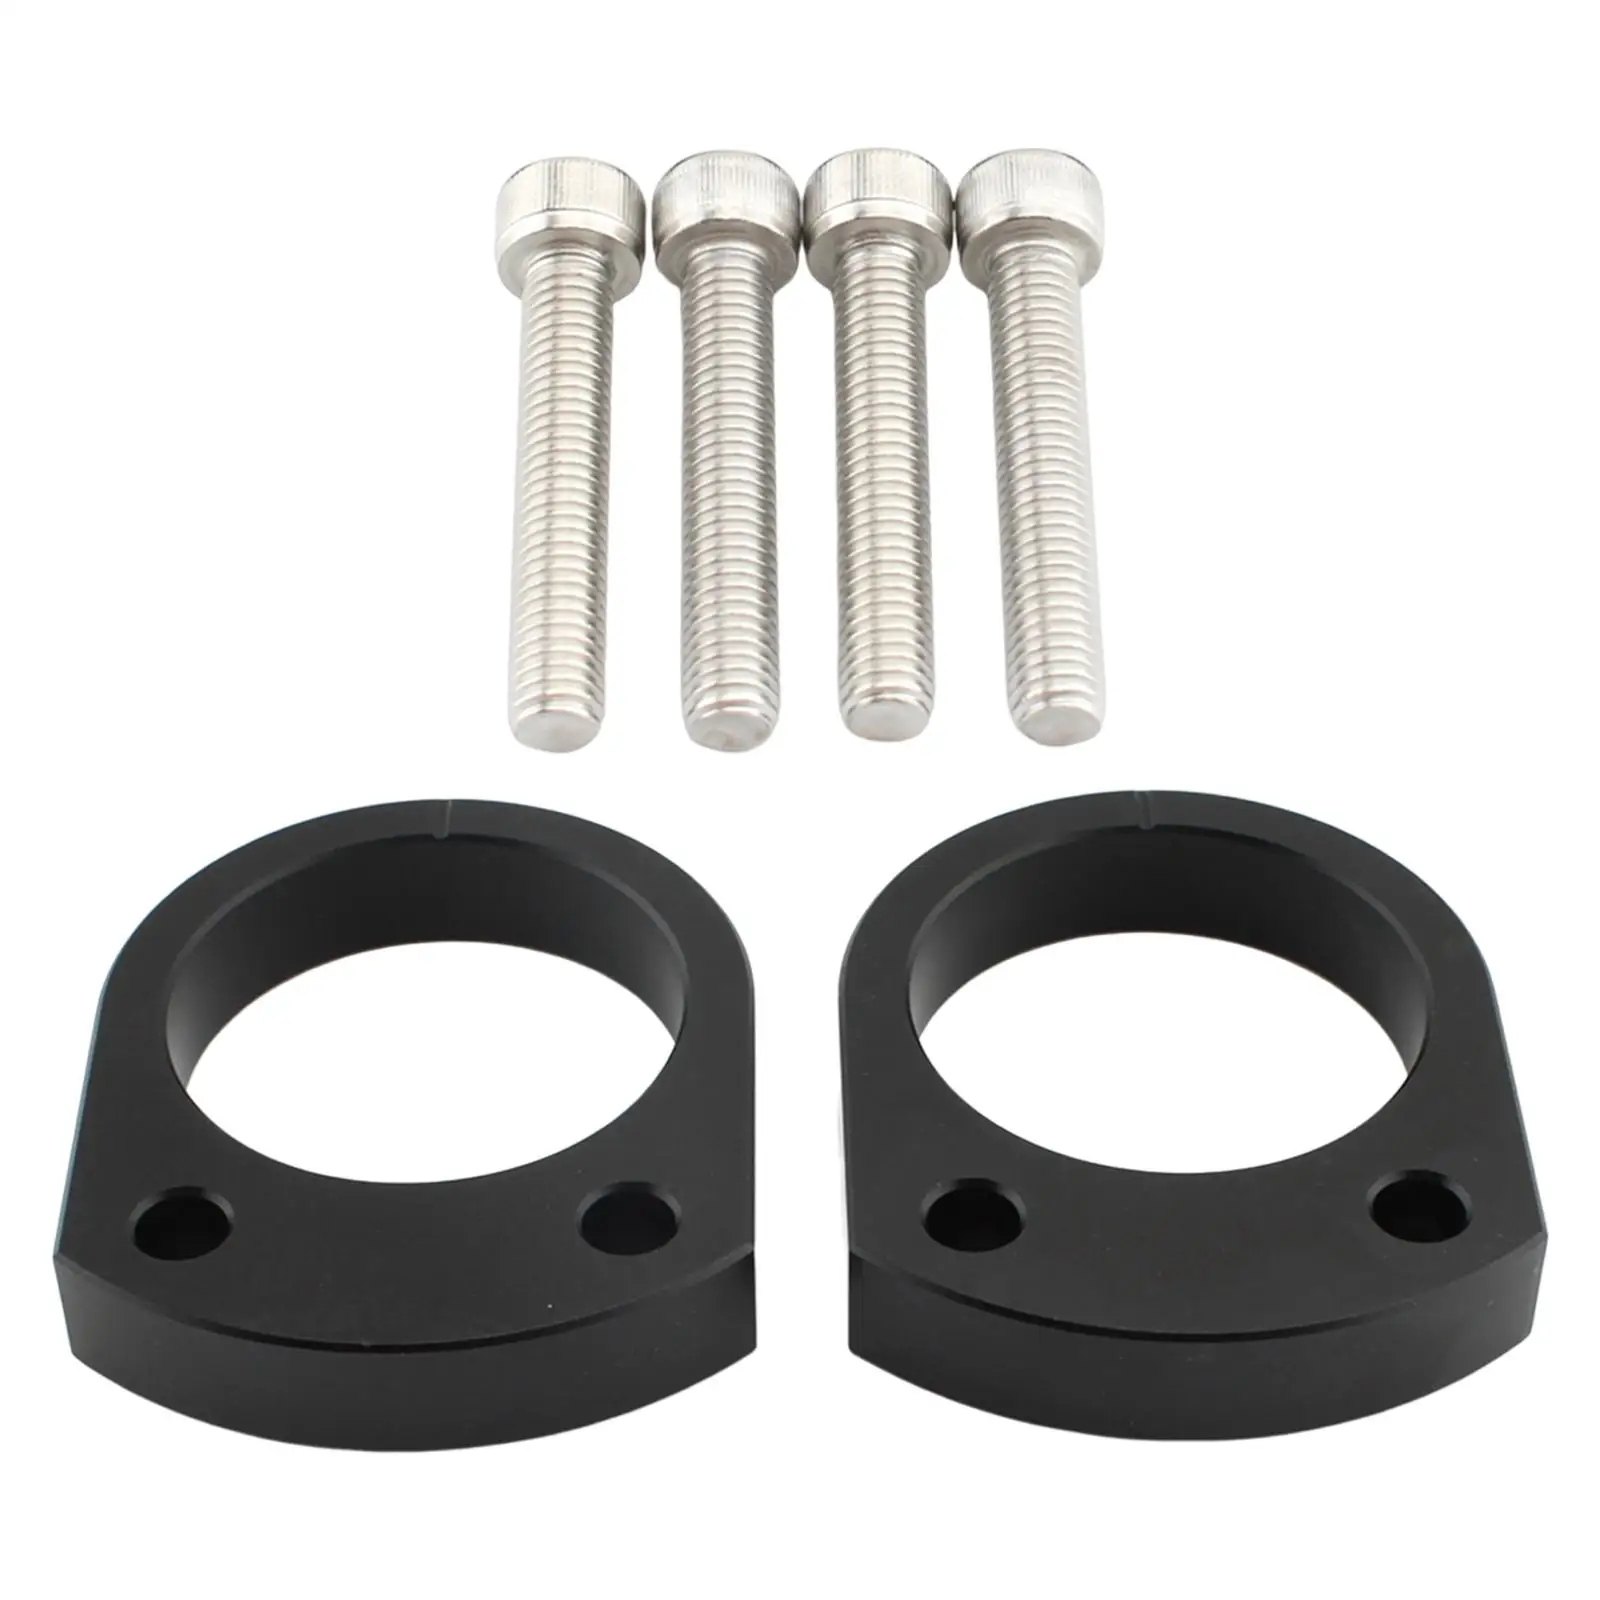 2Pcs Motorcycle Handlebar Risers 14mm Heightened Handle Bar Riser Clamp for